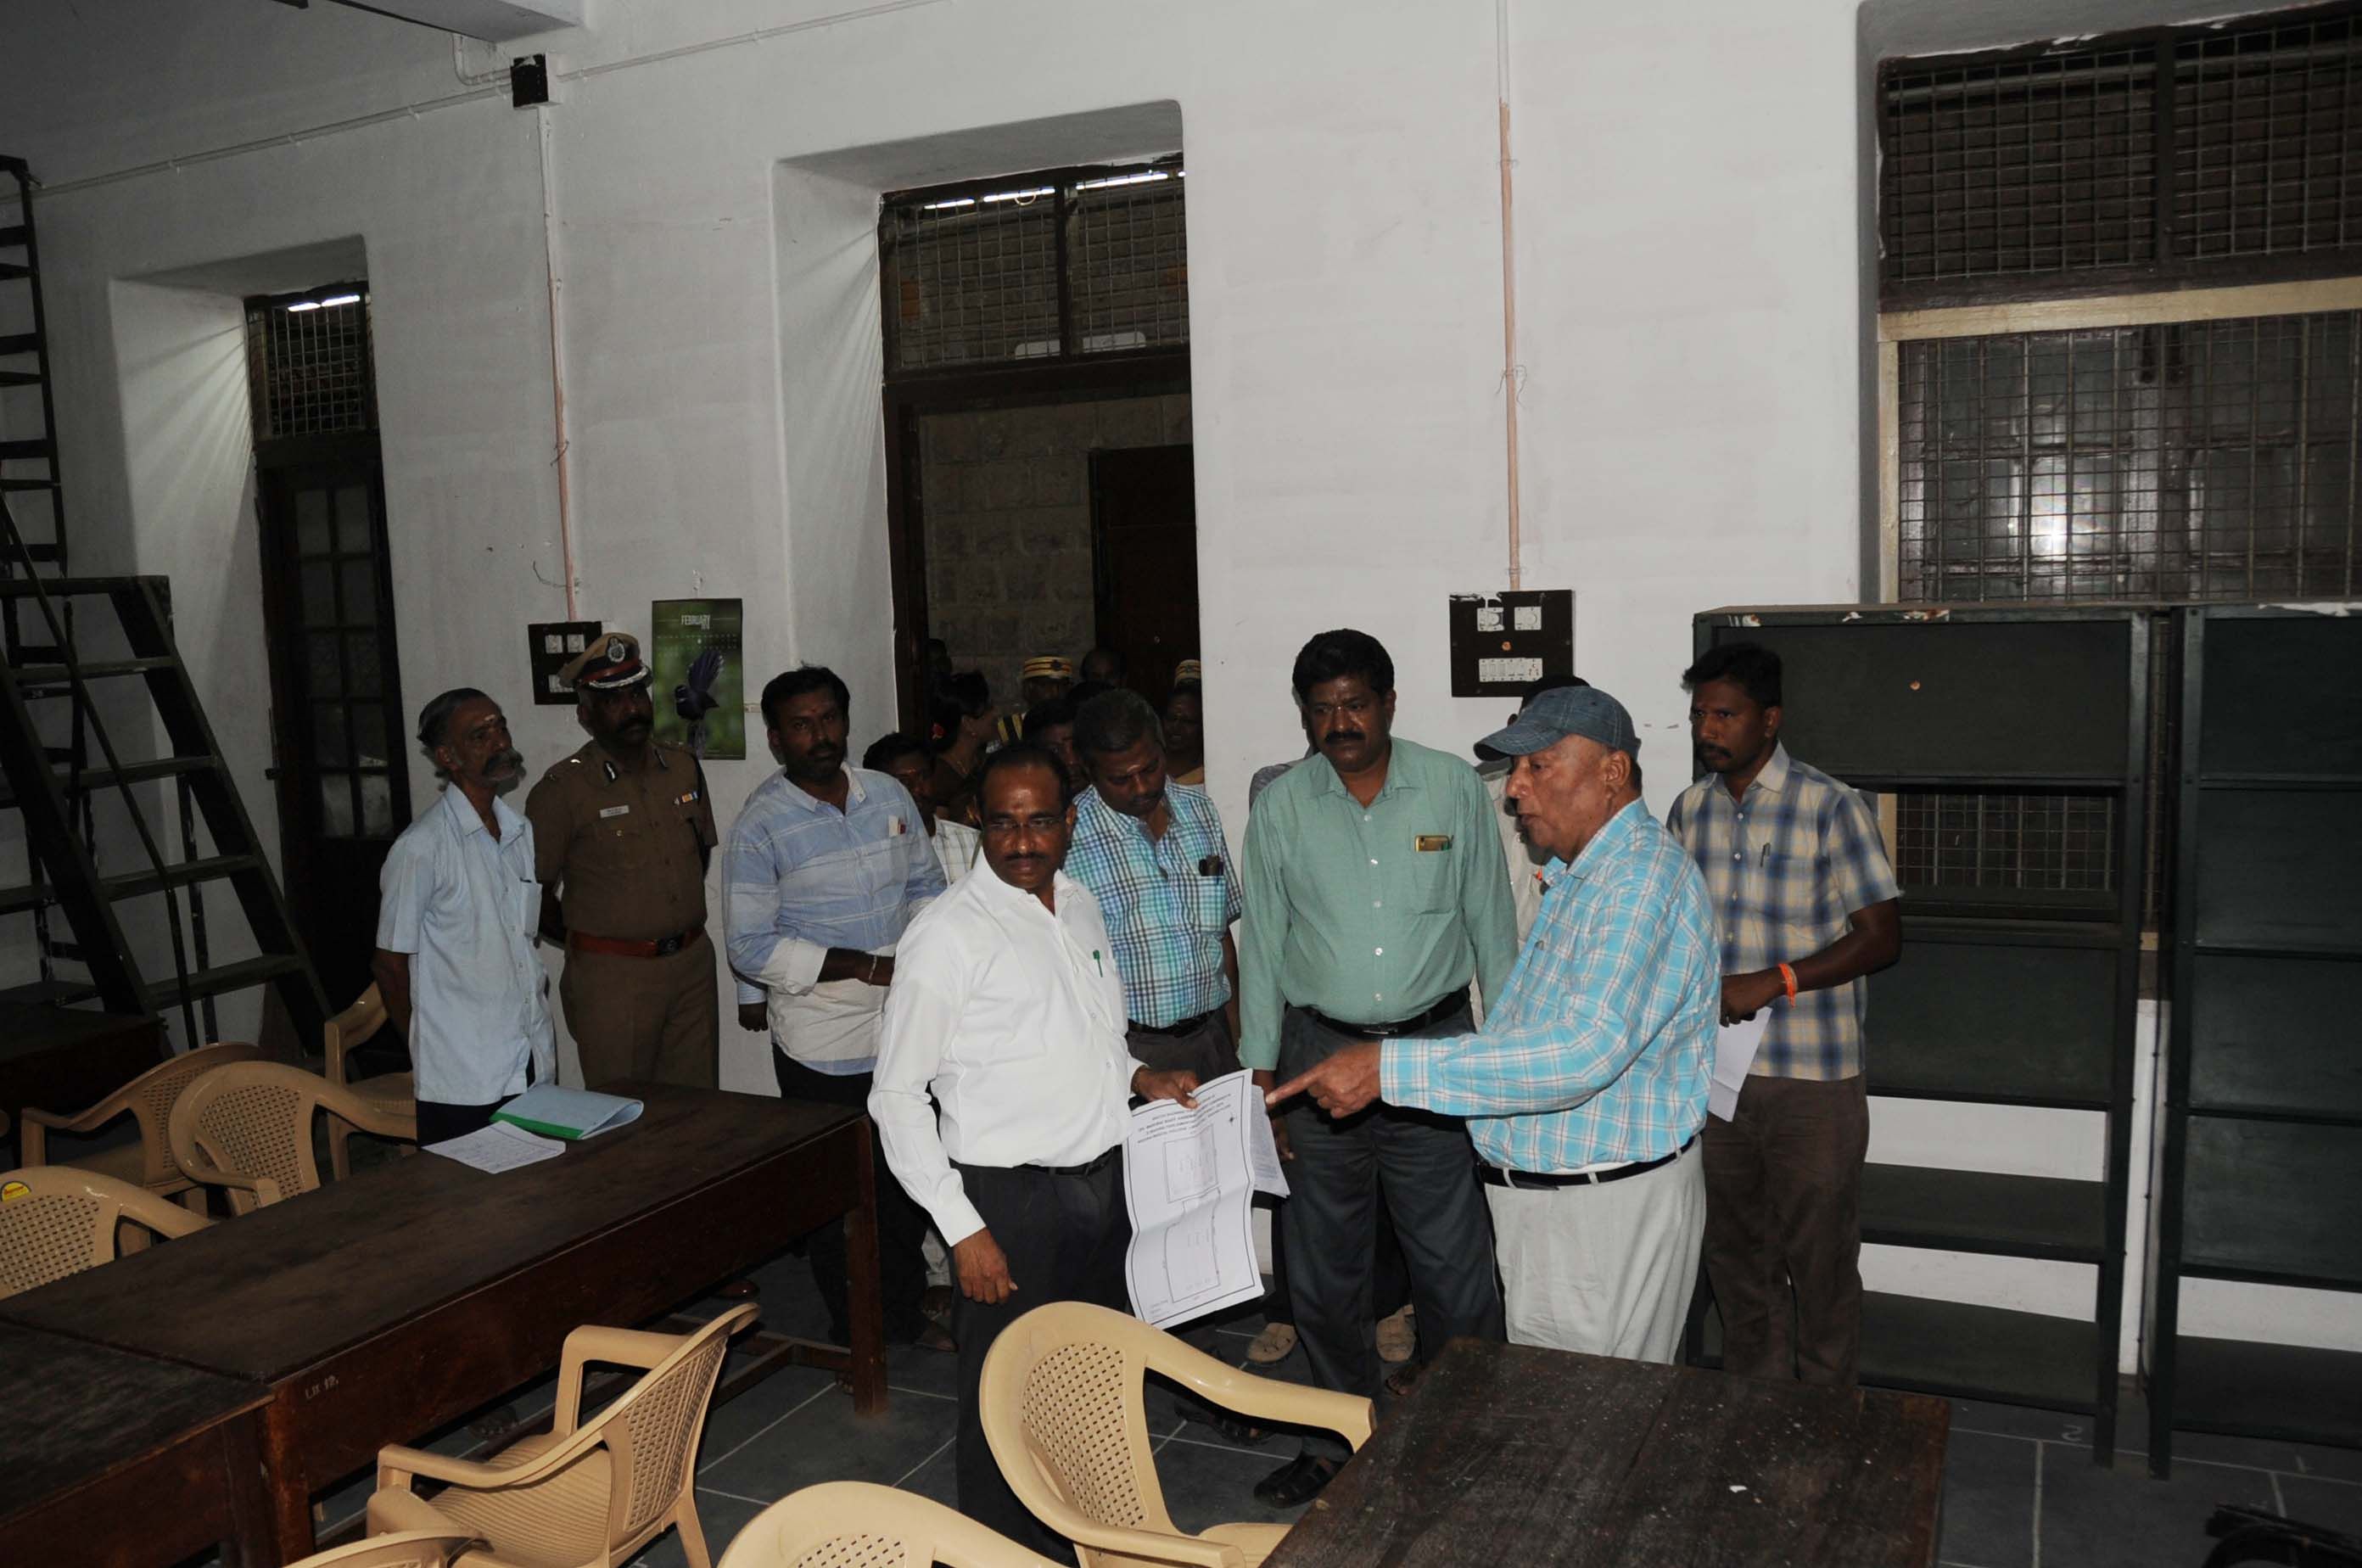 Madurai parliamentary general observer and District collector/Returning officer inspected the counting centre on Madurai north-Medical college at 01.04.2019.